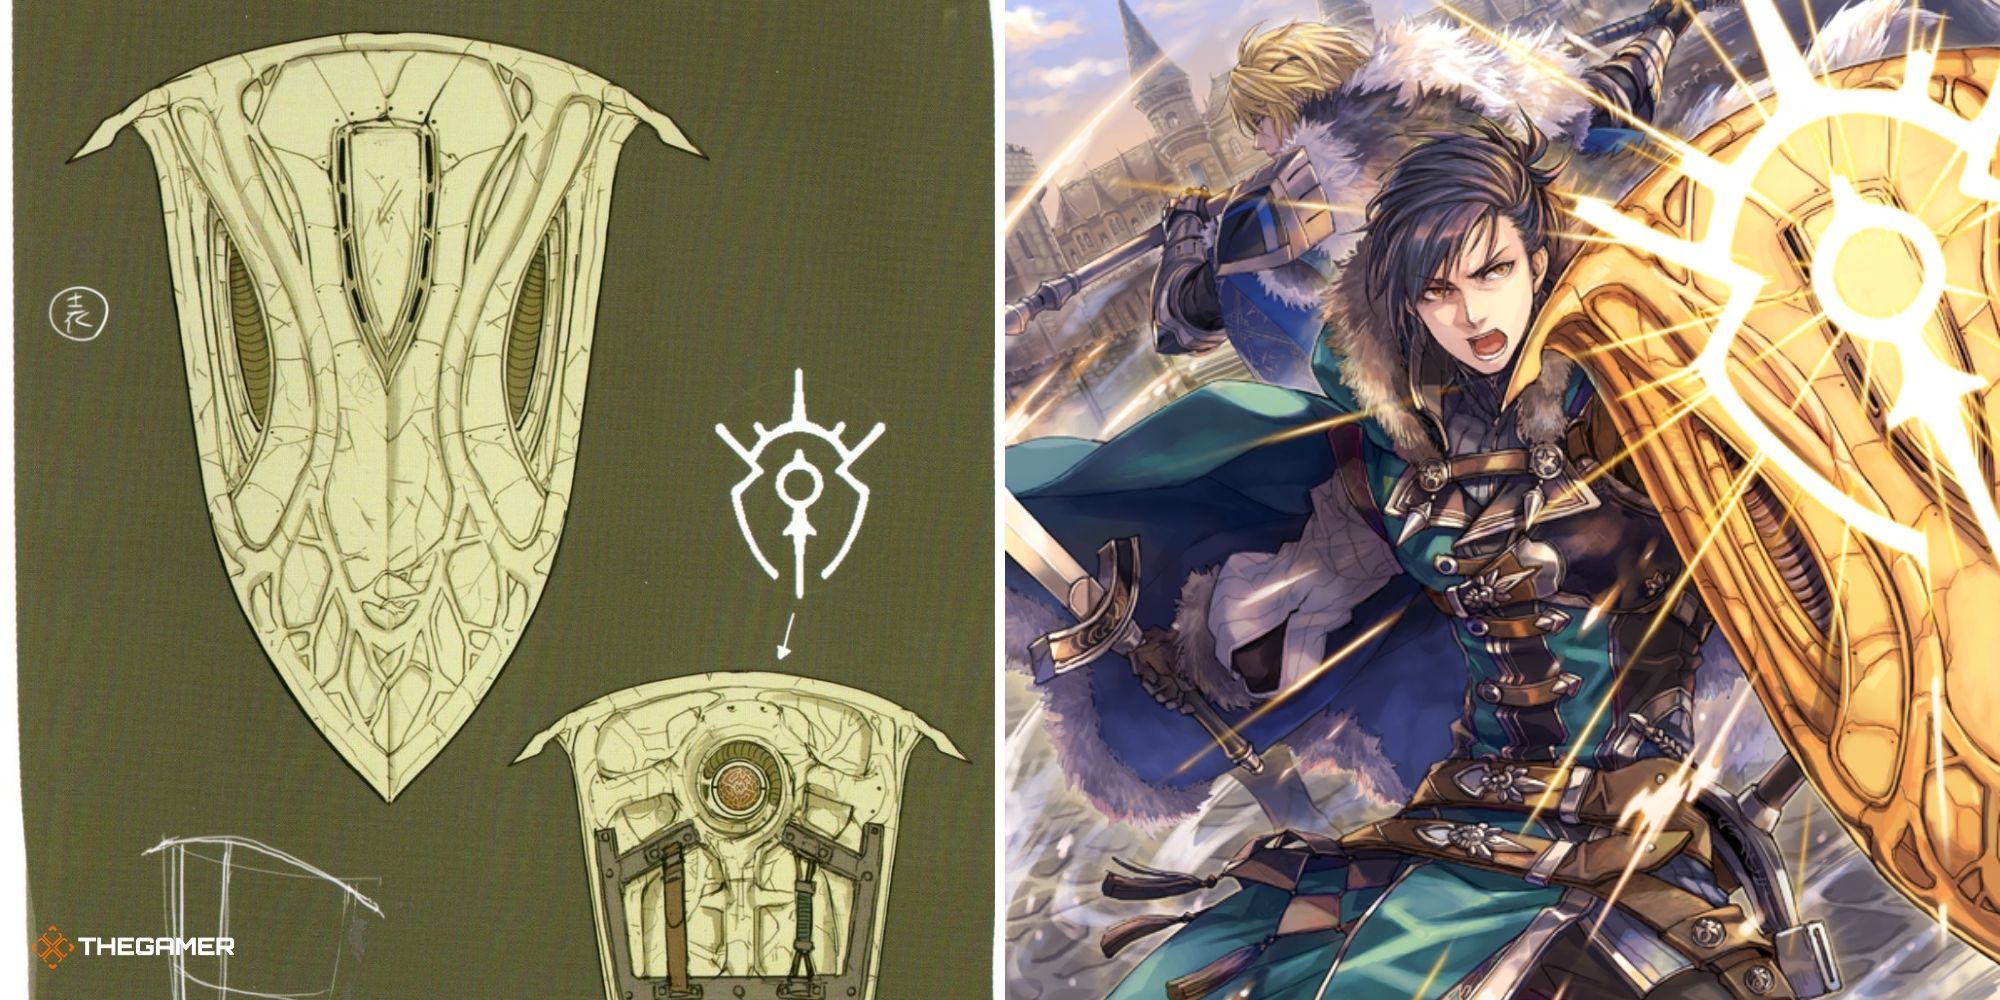 Fire Emblem Three Houses - Aegis Shield concept art on left, Felix with the relic in official art on right